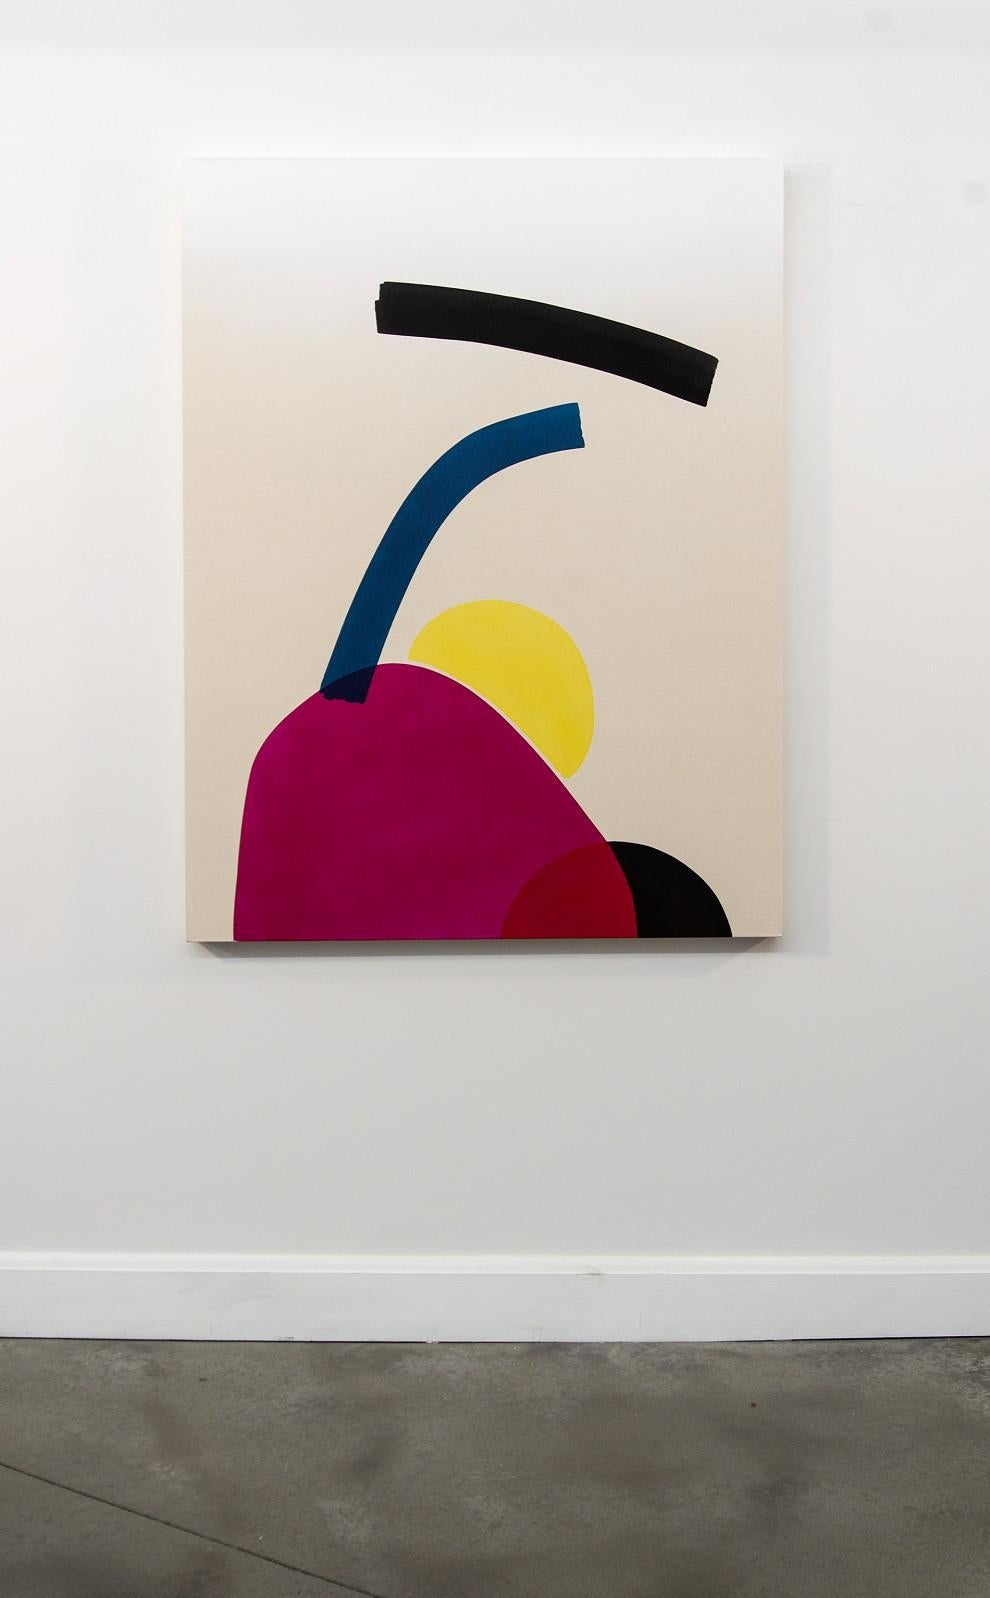 Hiding Sun with Black - bright, colorful, intersecting abstract shapes on canvas - Painting by Aron Hill